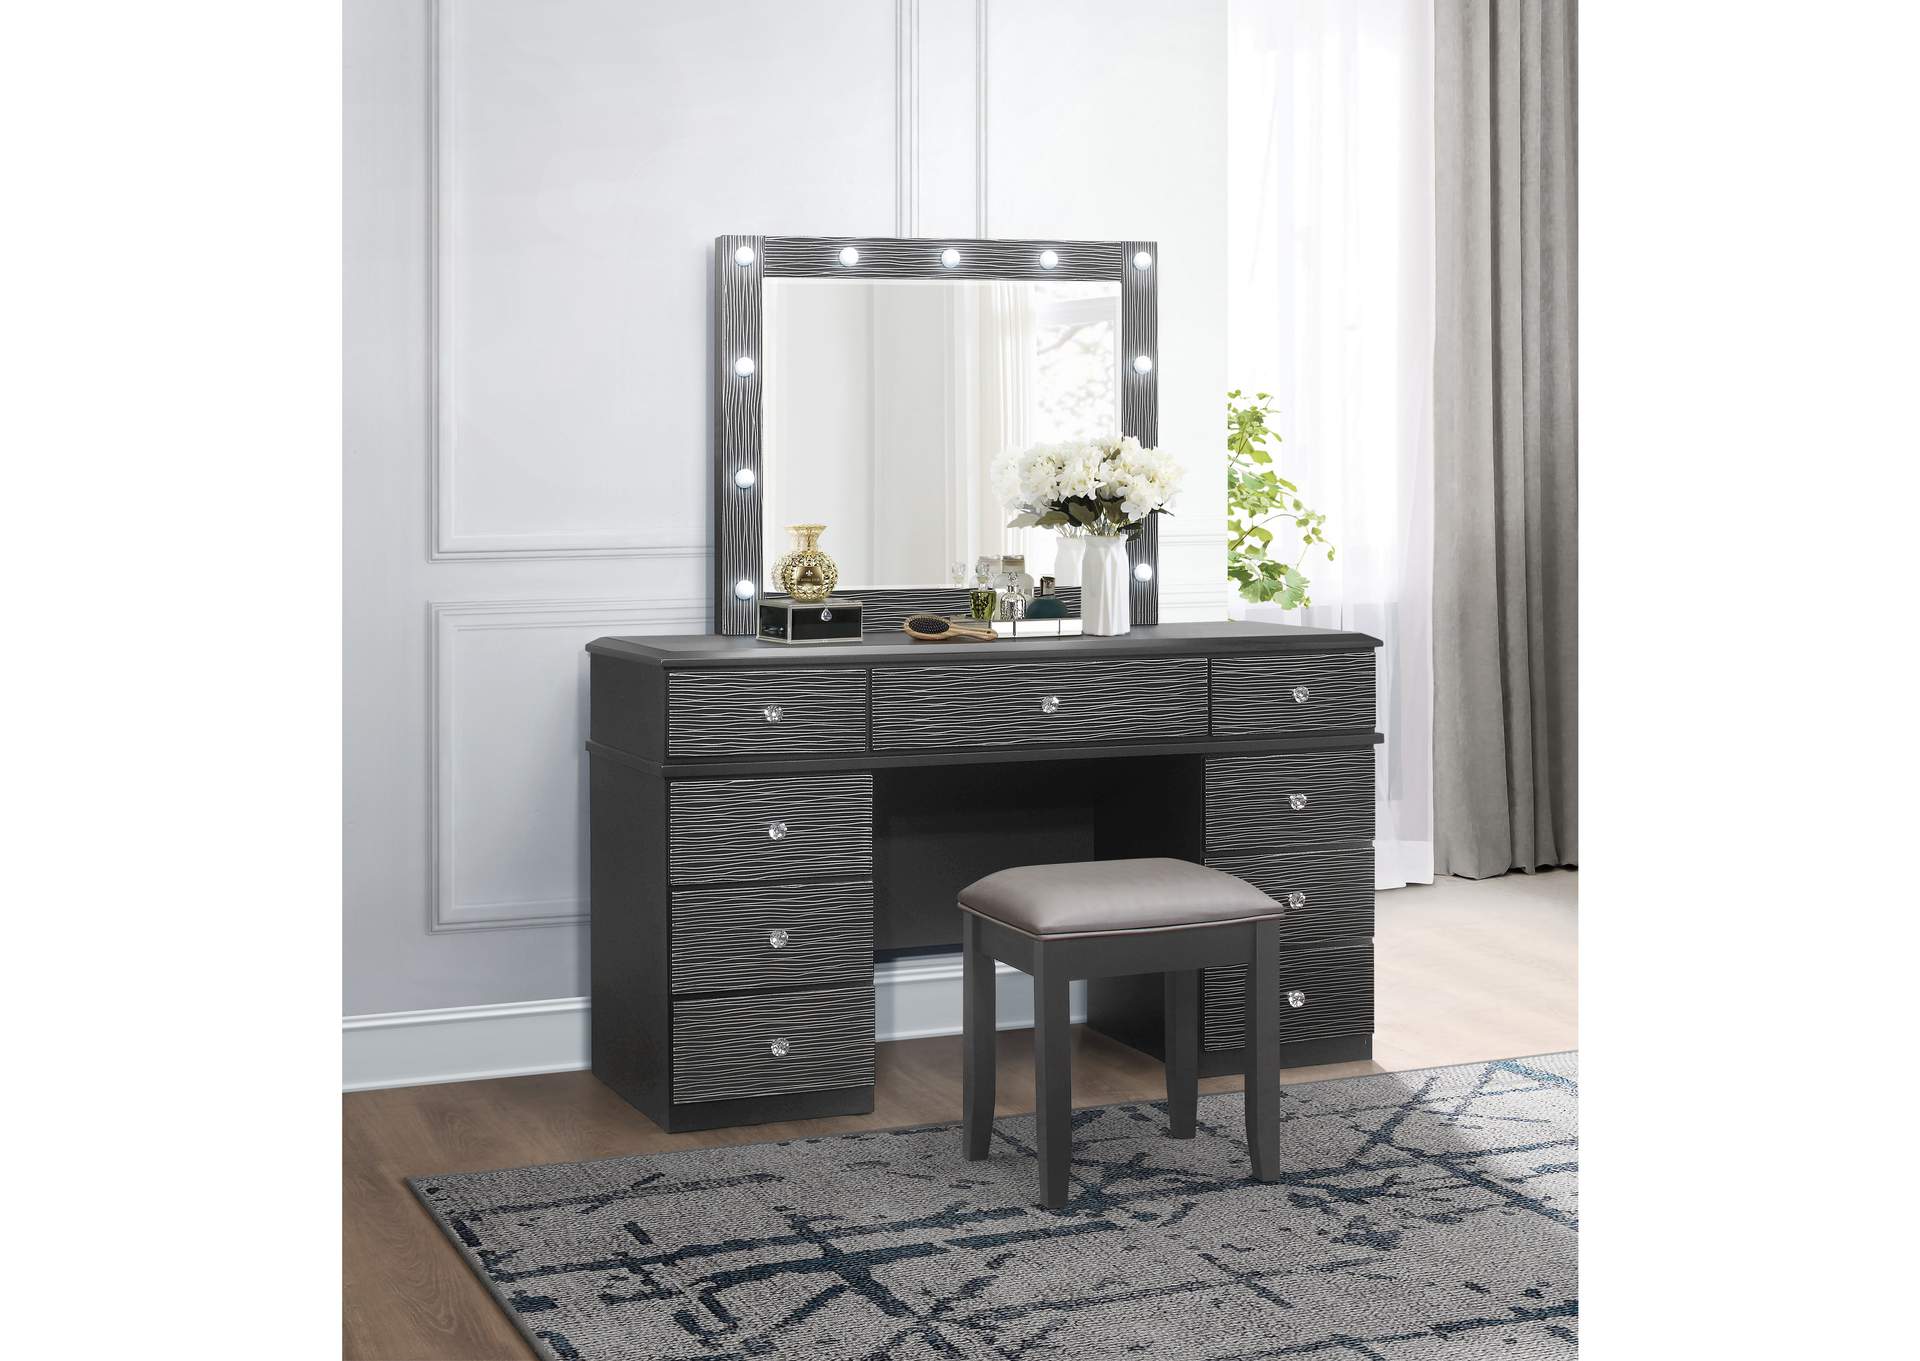 Addison Grey Vanity Set with Stool and Mirror,Global Furniture USA